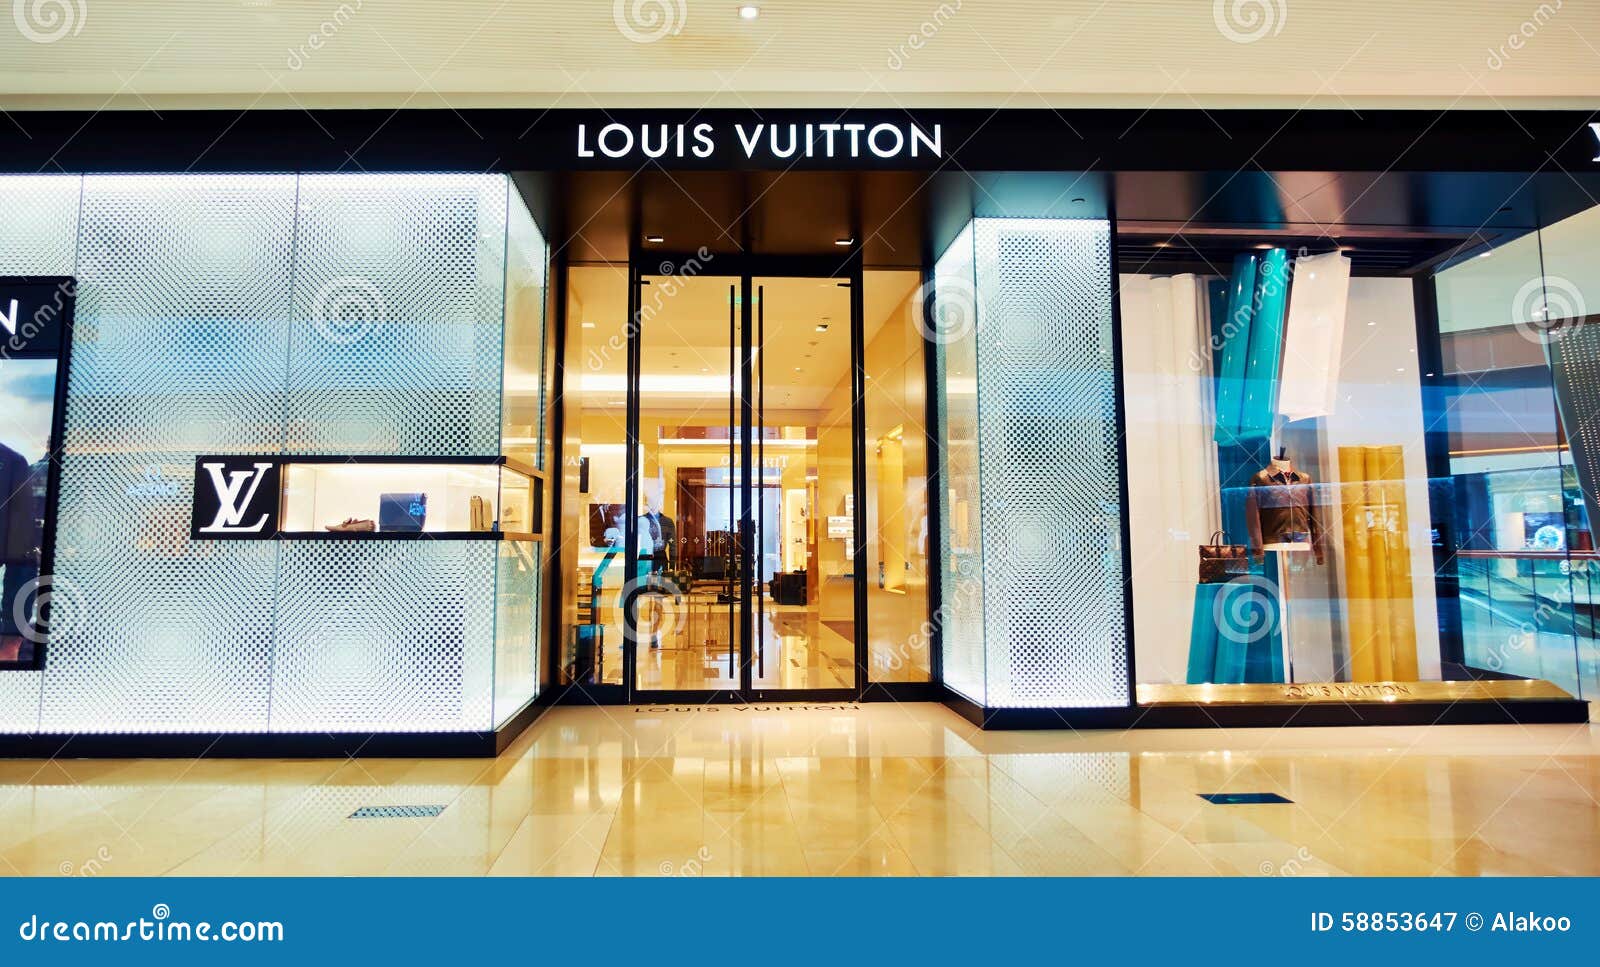 boutiques that sell louis vuitton